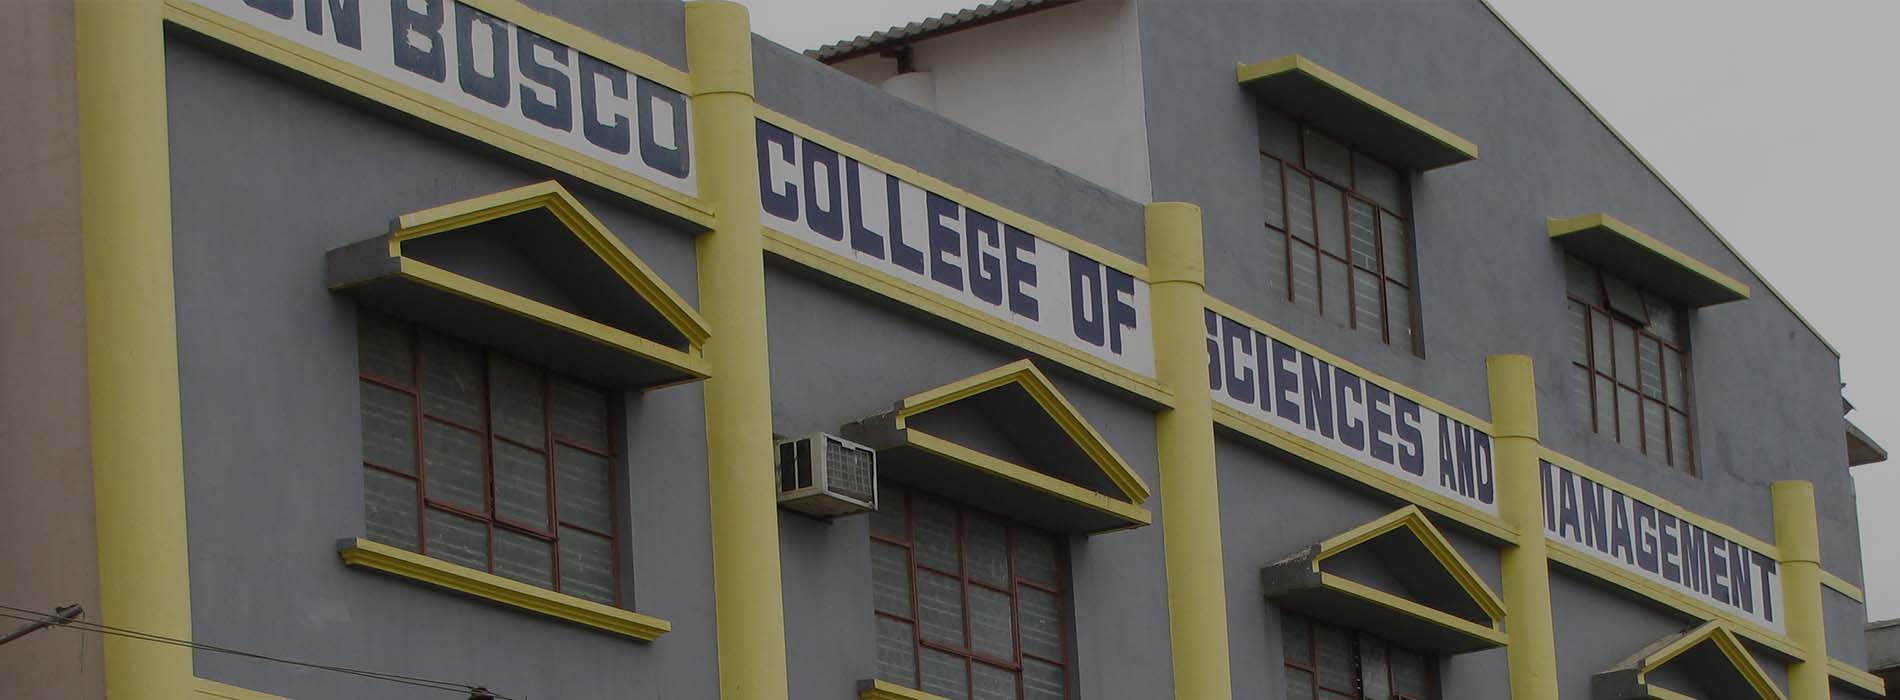 DON BOSCO GROUP OF INSTITUTIONS BANGALORE